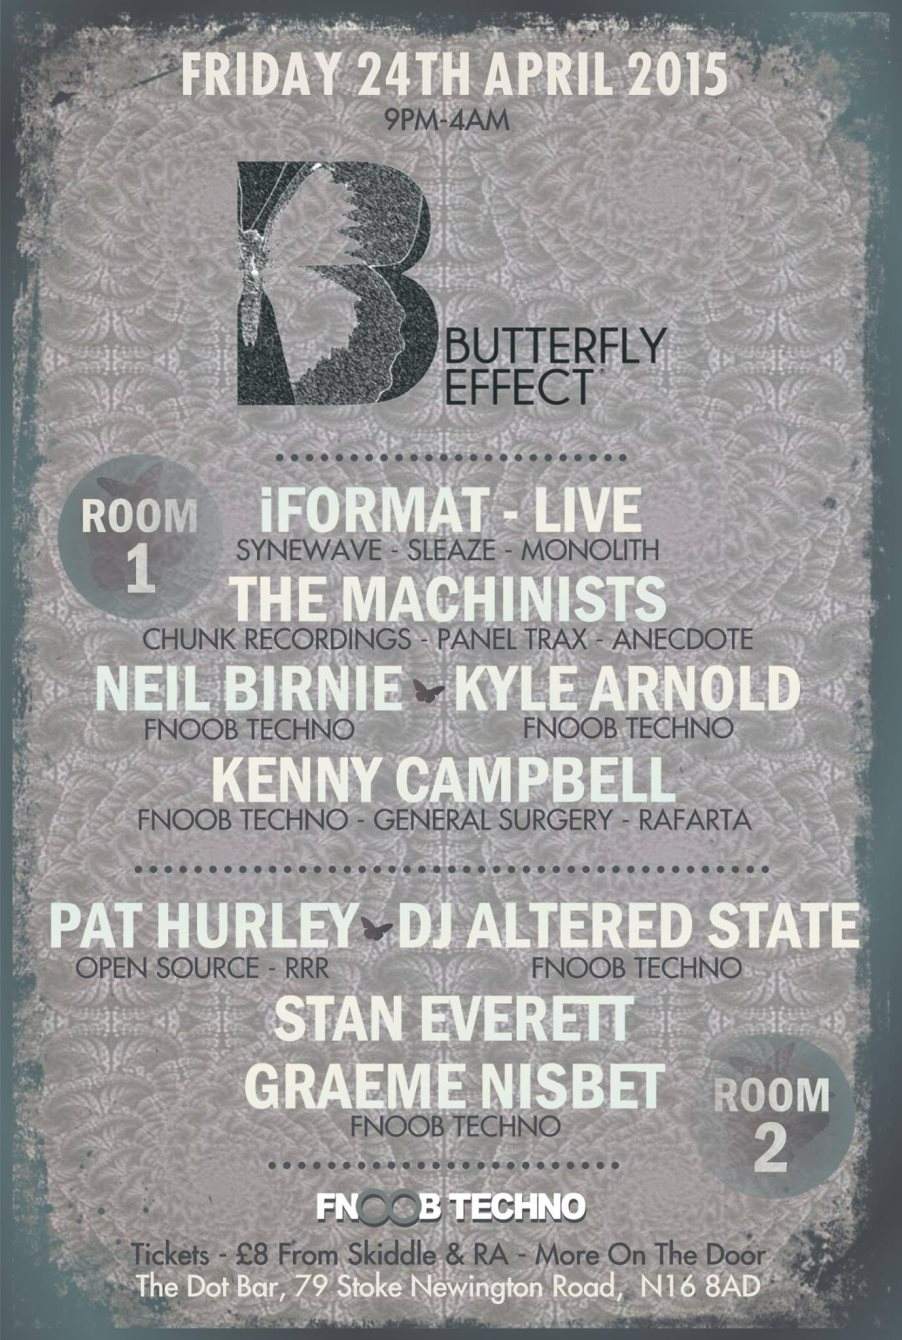 Butterfly Effect #4 presents Iformat Live //Neil Birnie//The Machinists//Kenny Campbell - フライヤー表